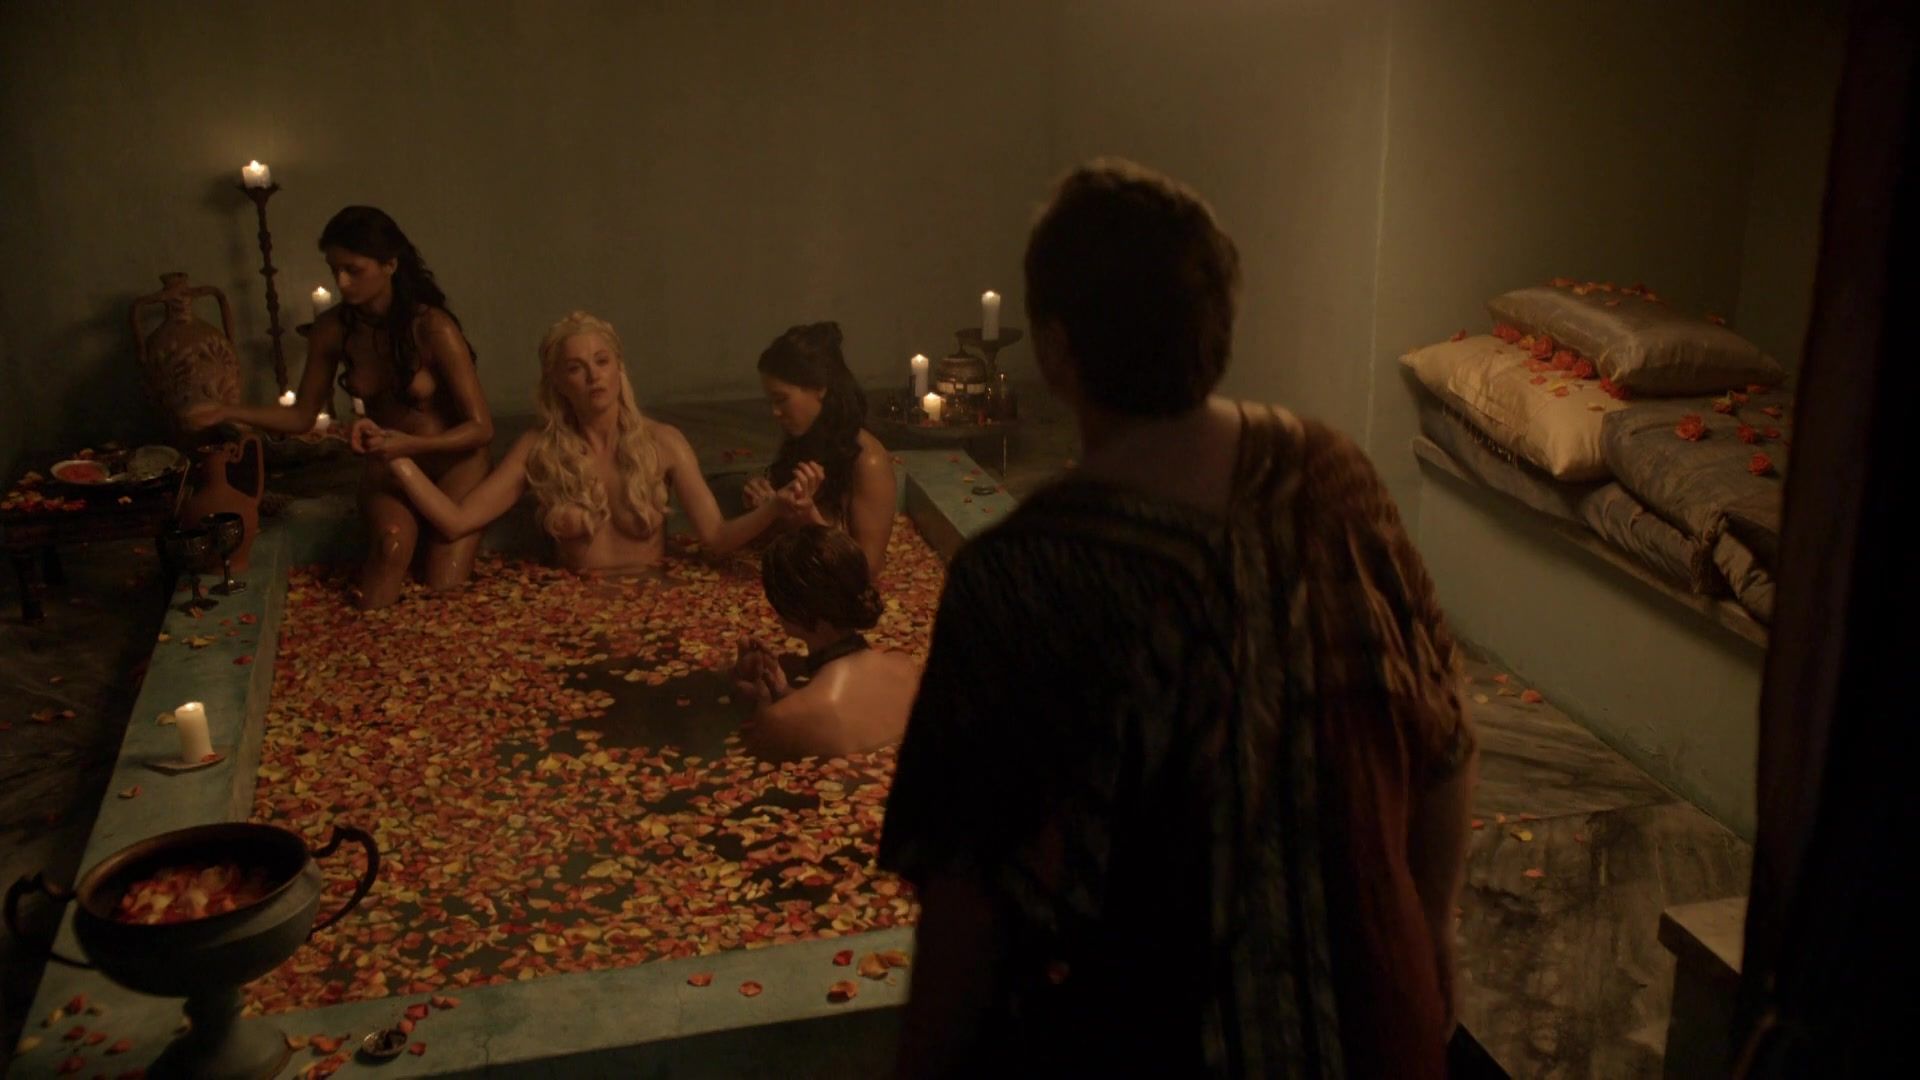 Butthole Lucy Lawless, Lesley-Ann Brandt, etc - Spartacus Blood and Sand s01e06 (2010) Exhibitionist